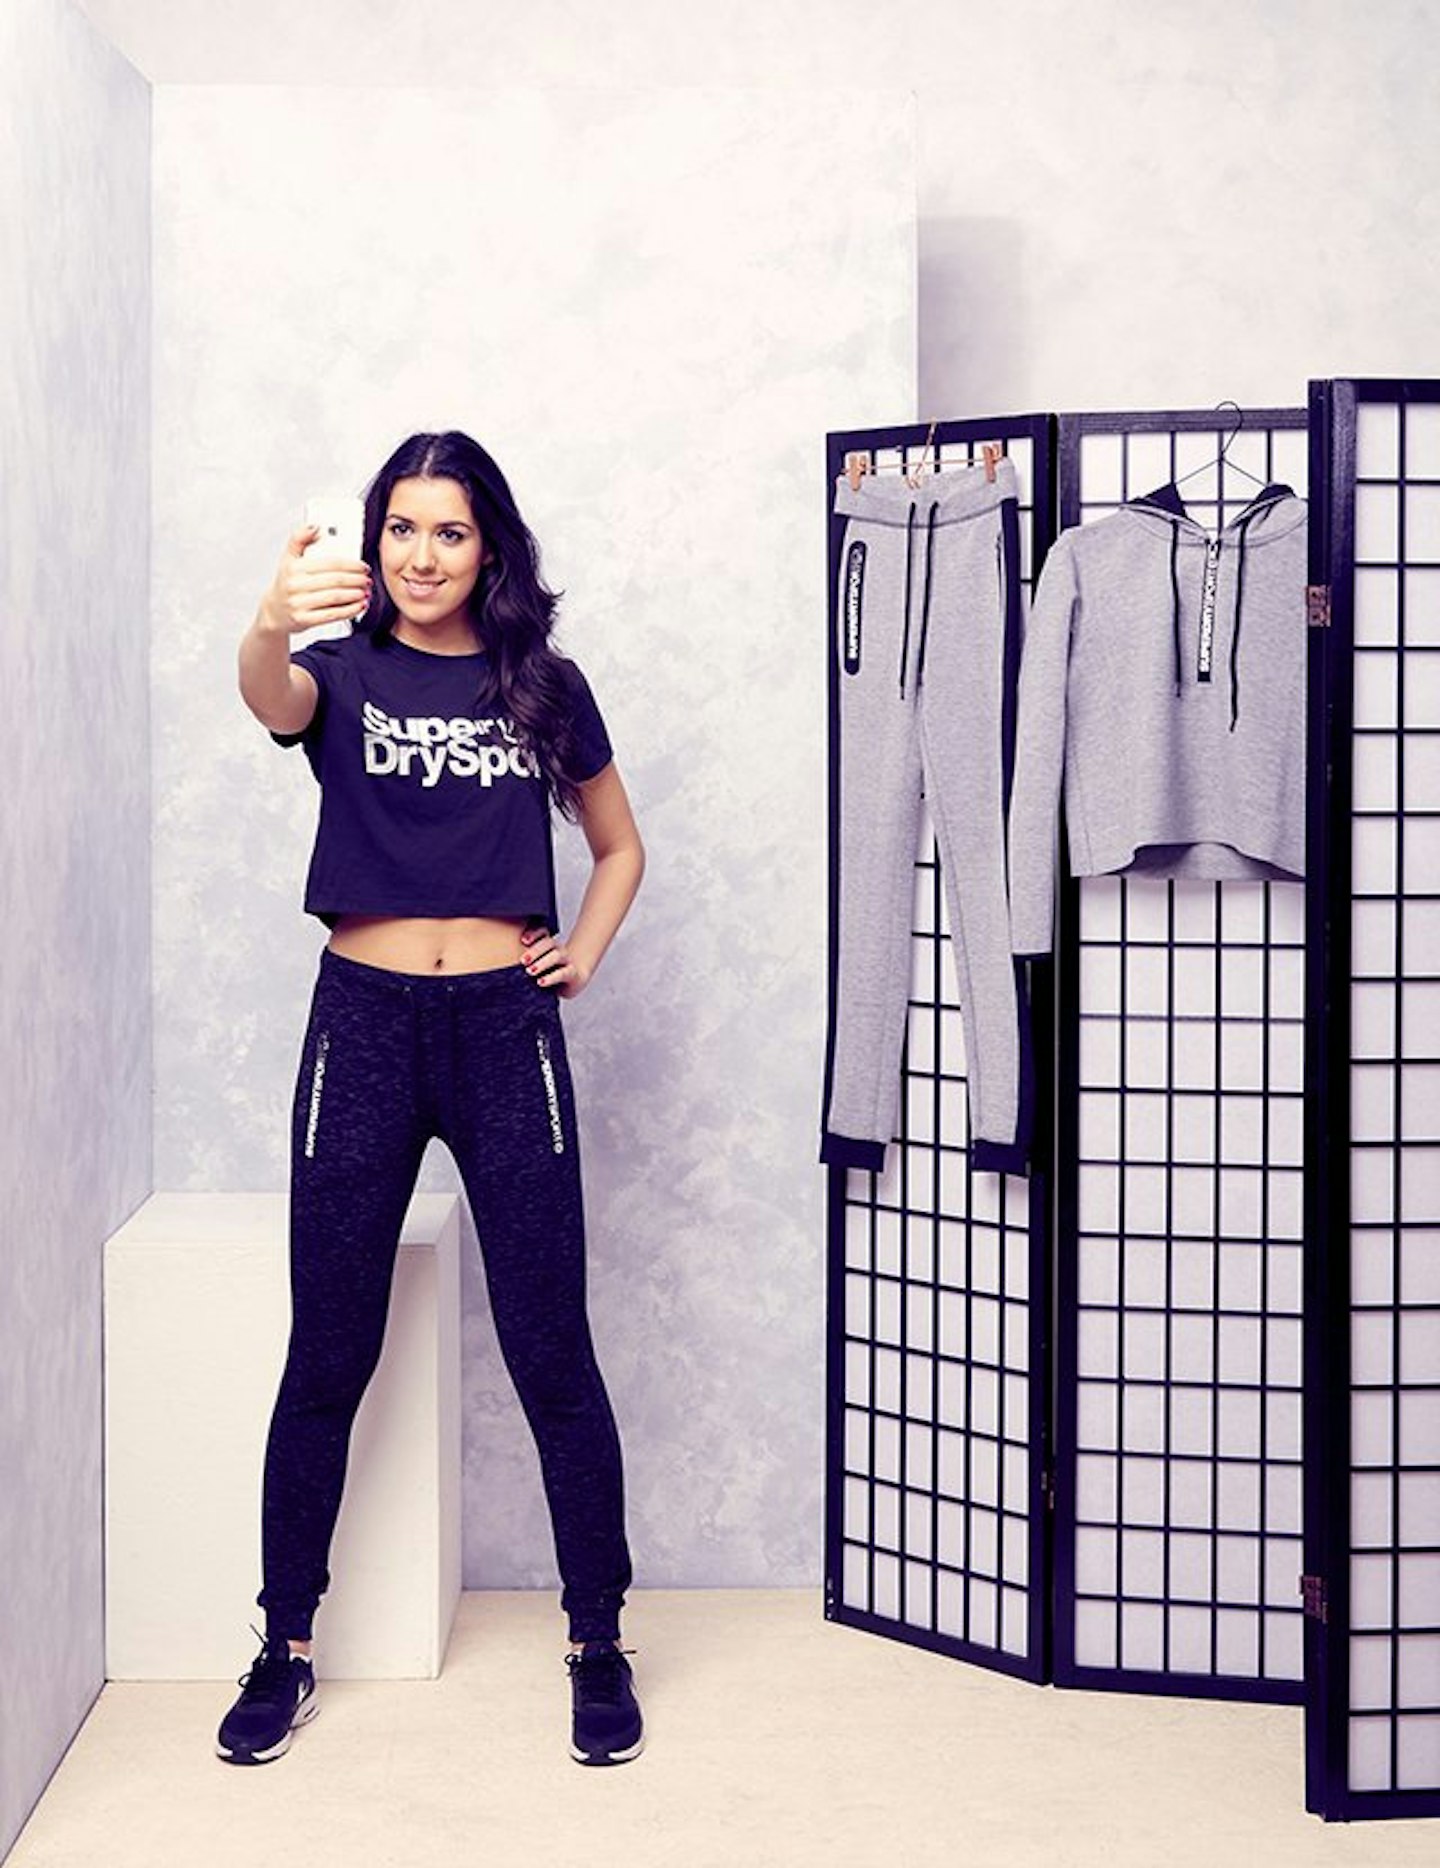 We Tried On All Of The Gym Wear From Superdry So That You Don't Have To